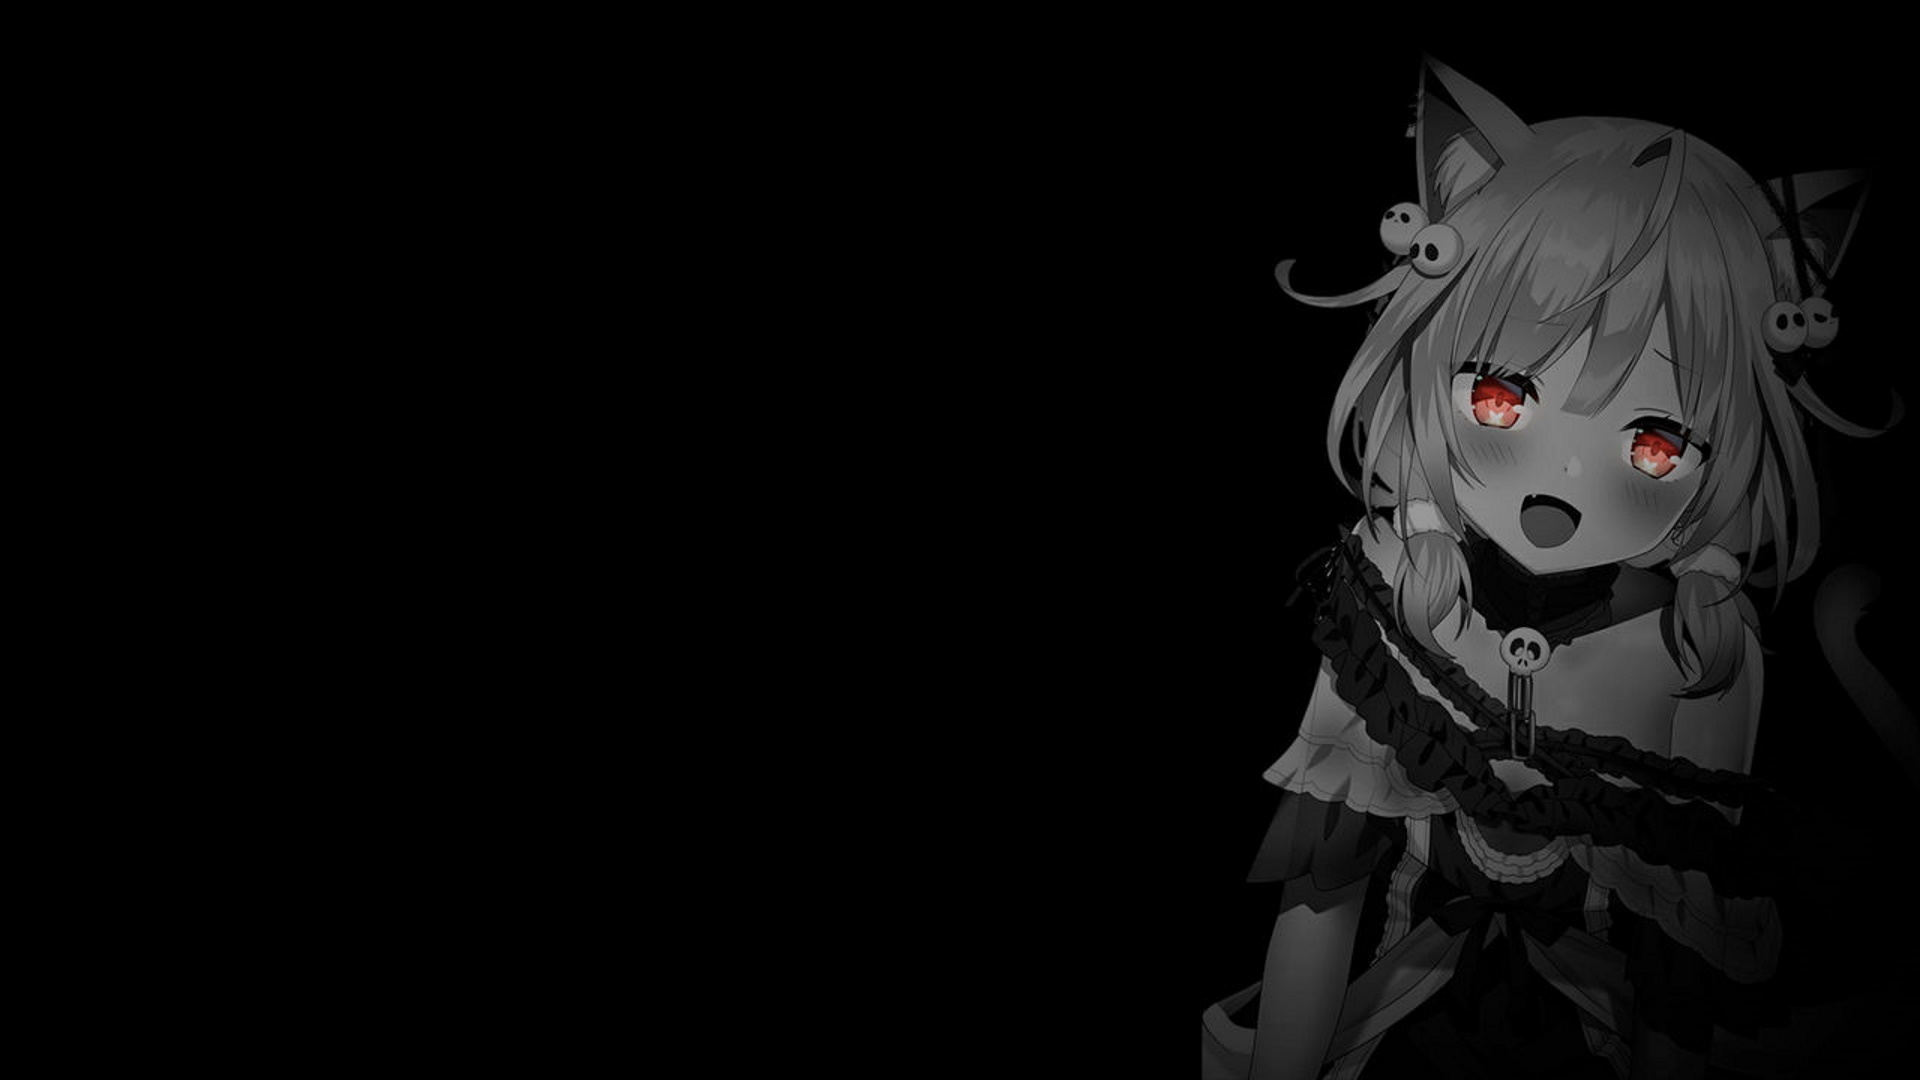 Selective Coloring Black Background Dark Background Simple Background Anime  Girls Cat Girl Cat Ears Wallpaper - Resolution:1920x1080 - ID:1318099 -  